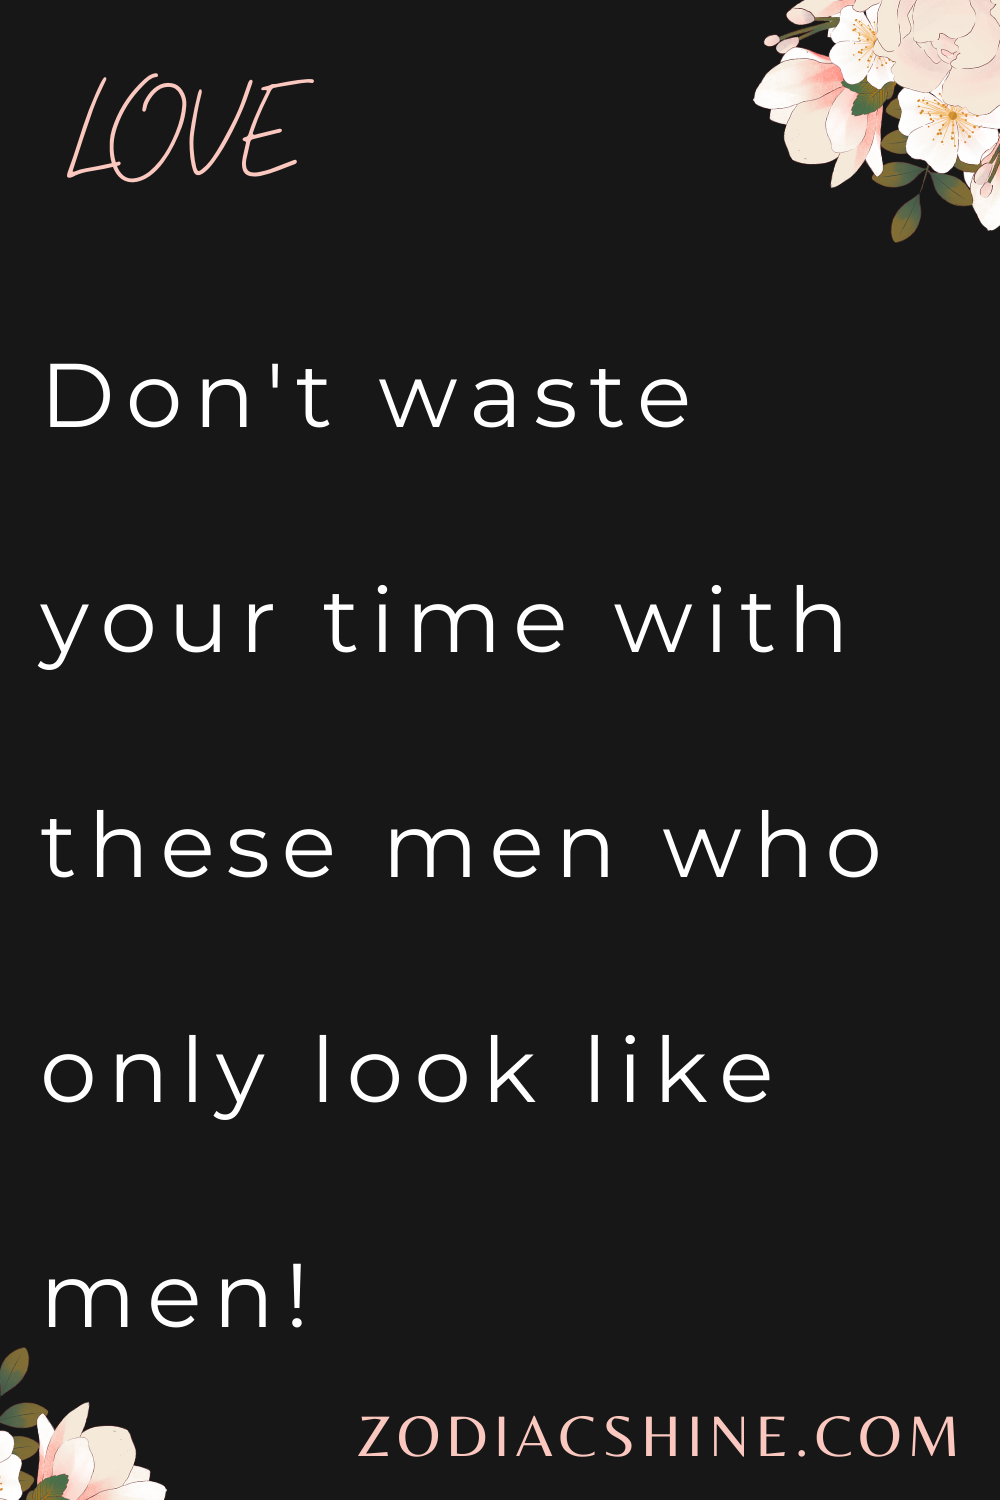 Don't waste your time with these men who only look like men!